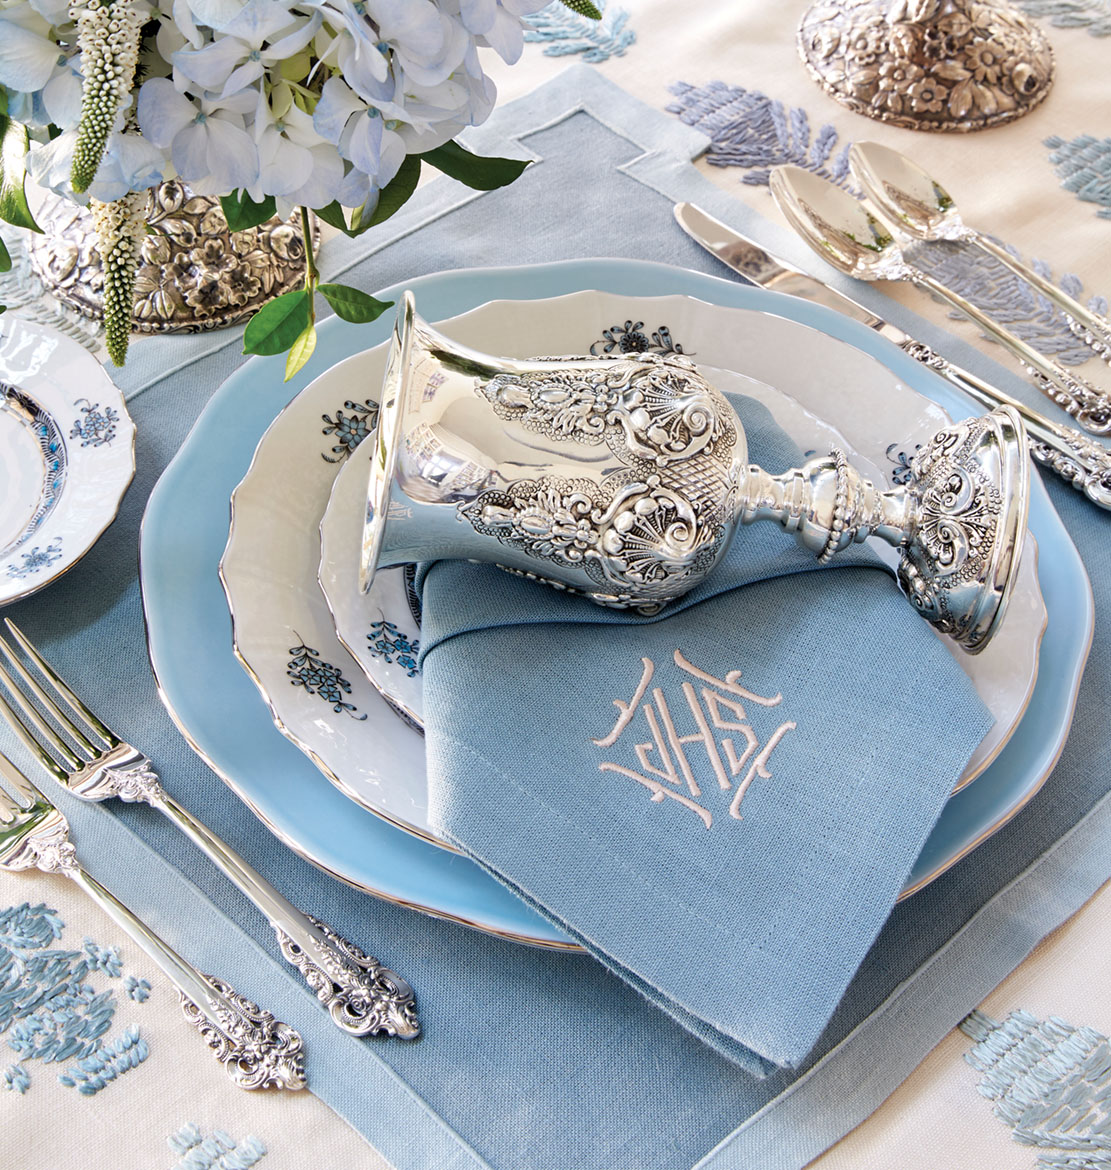 Ice blue, white, and silver tabletop decor